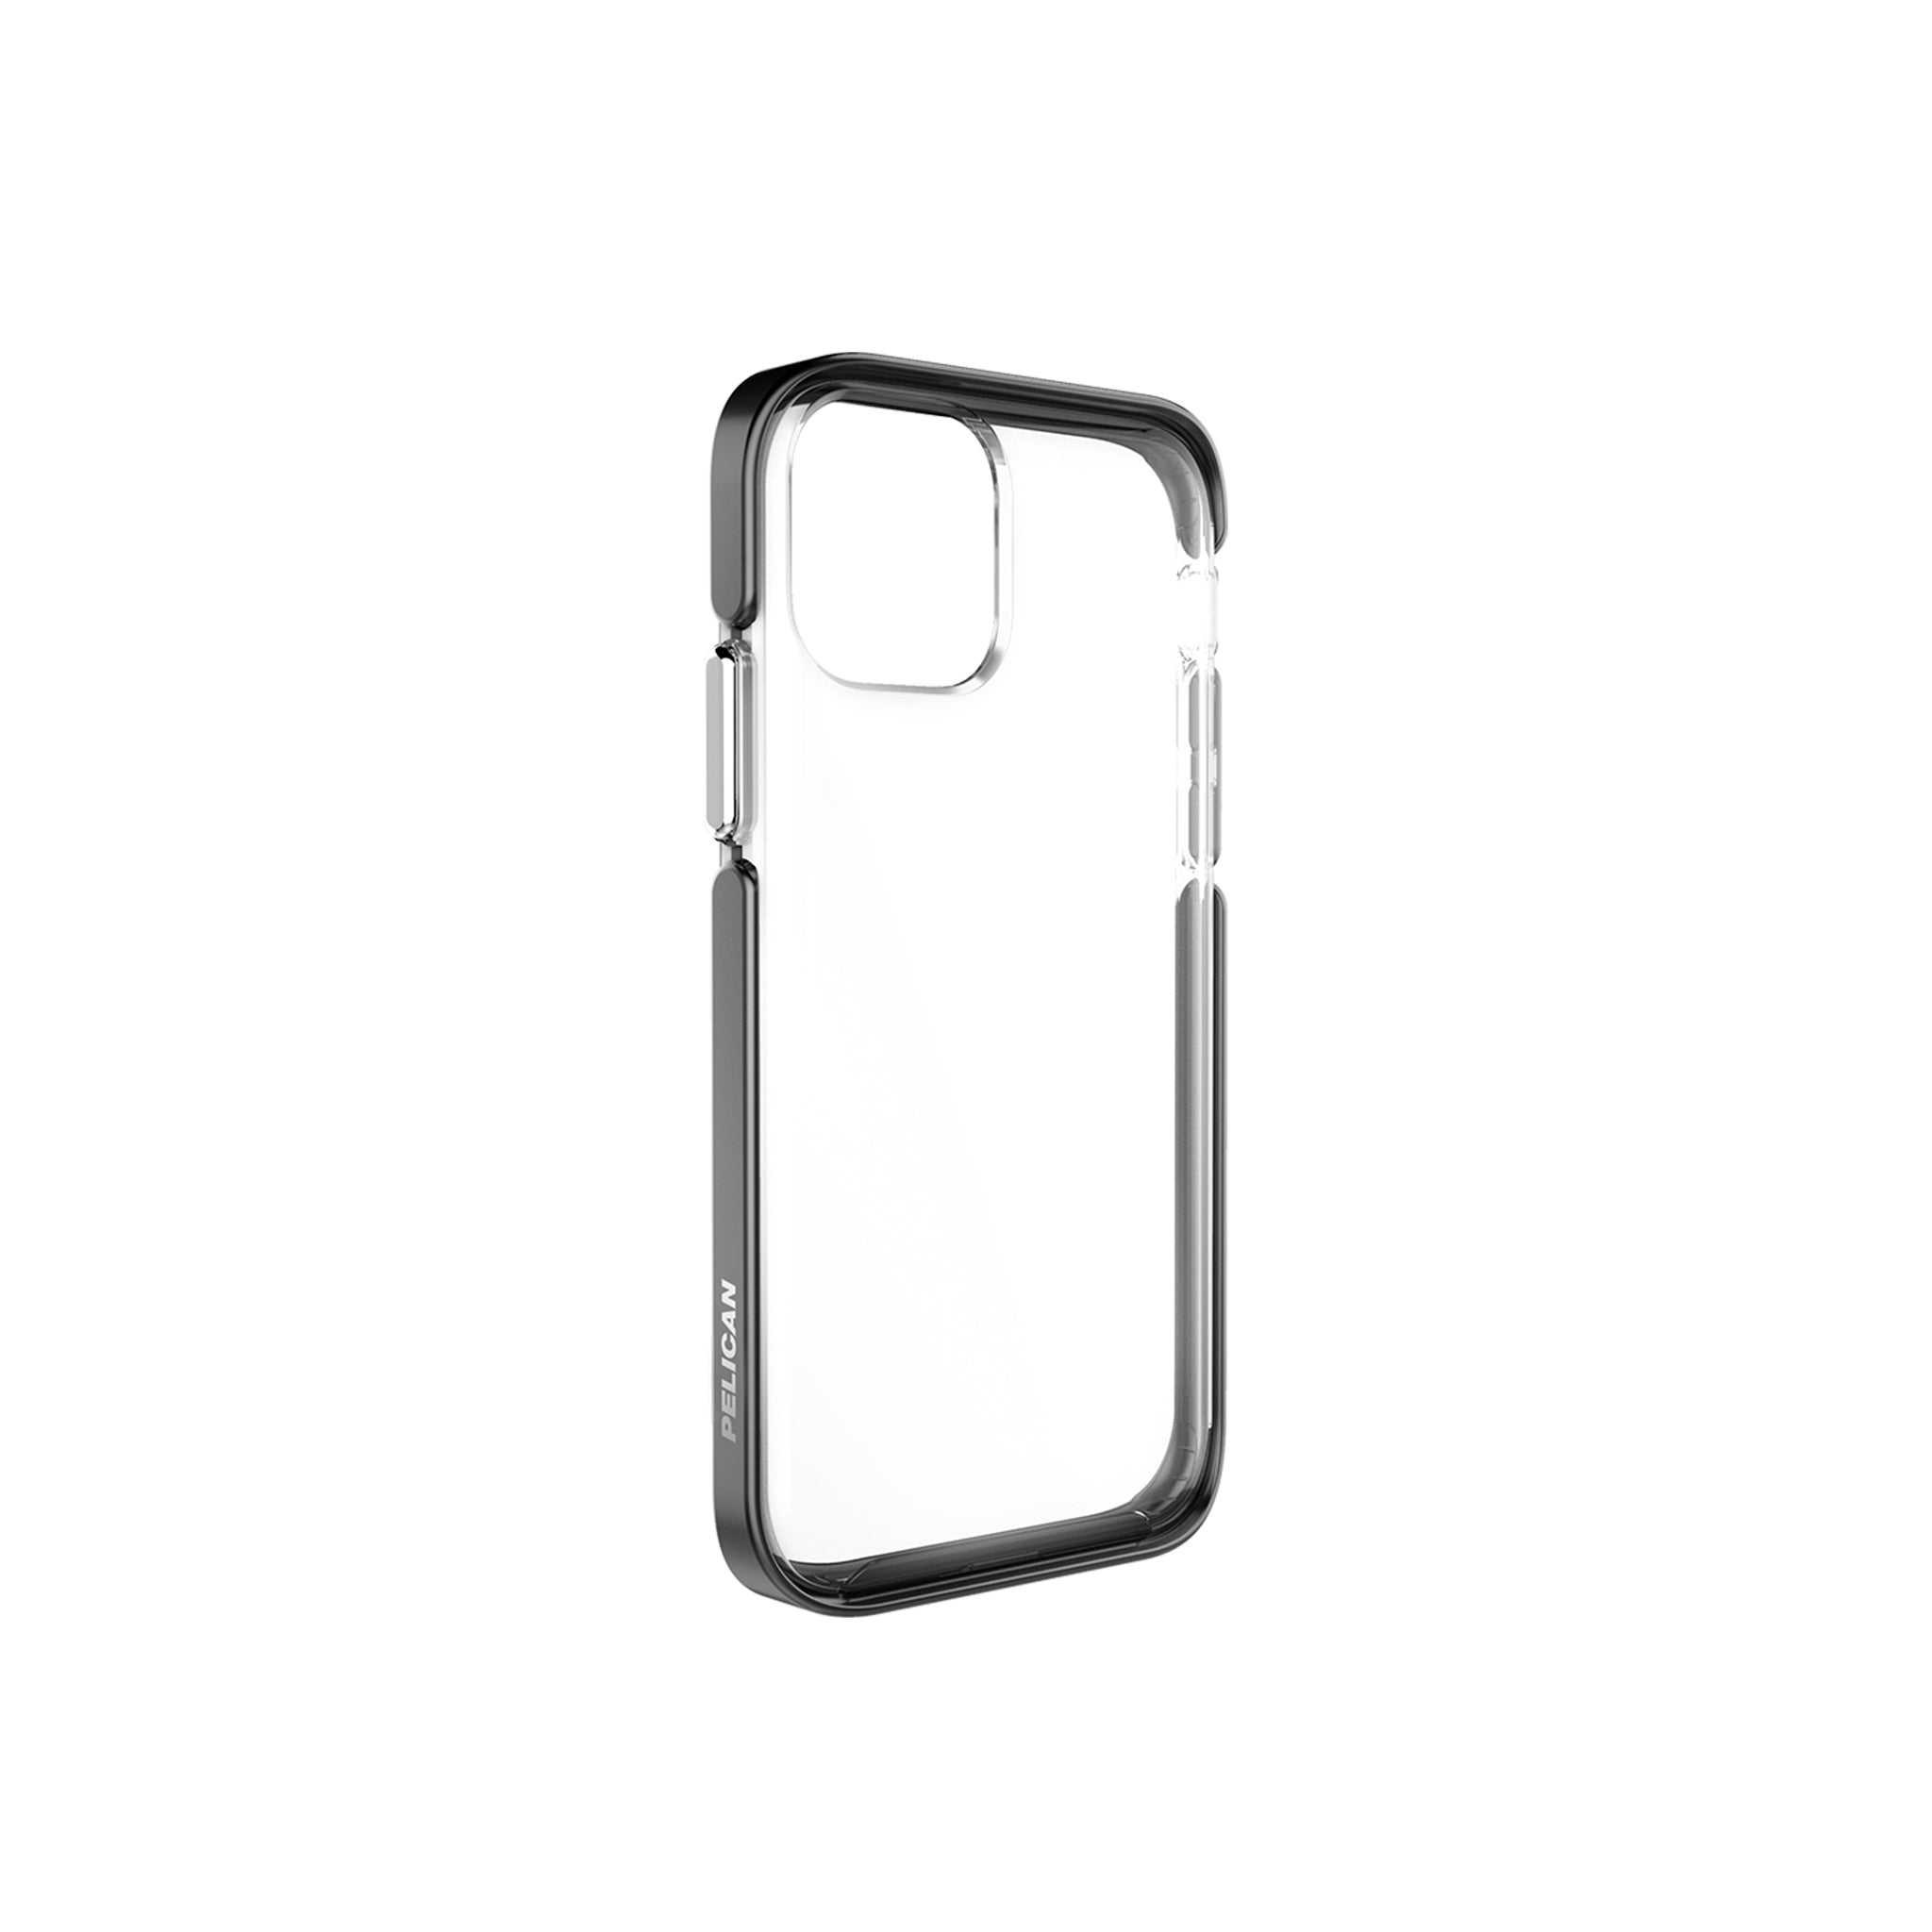 Pelican - Ambassador Case For Apple iPhone 11 Pro / Xs / X - Clear, Black And Silver